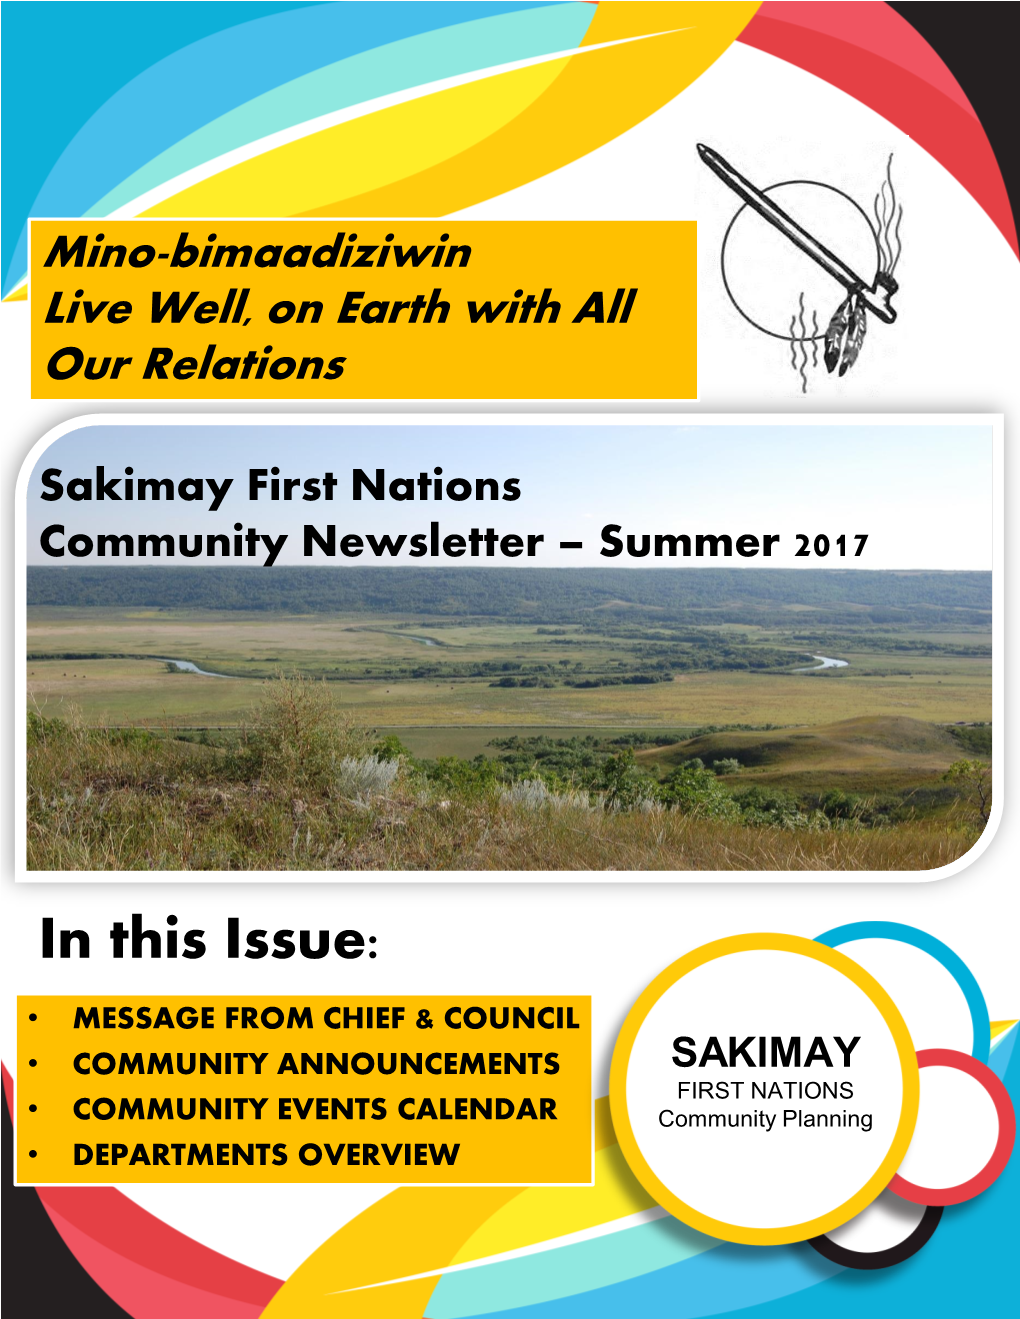 Sakimay First Nations Community Newsletter Summer 2017